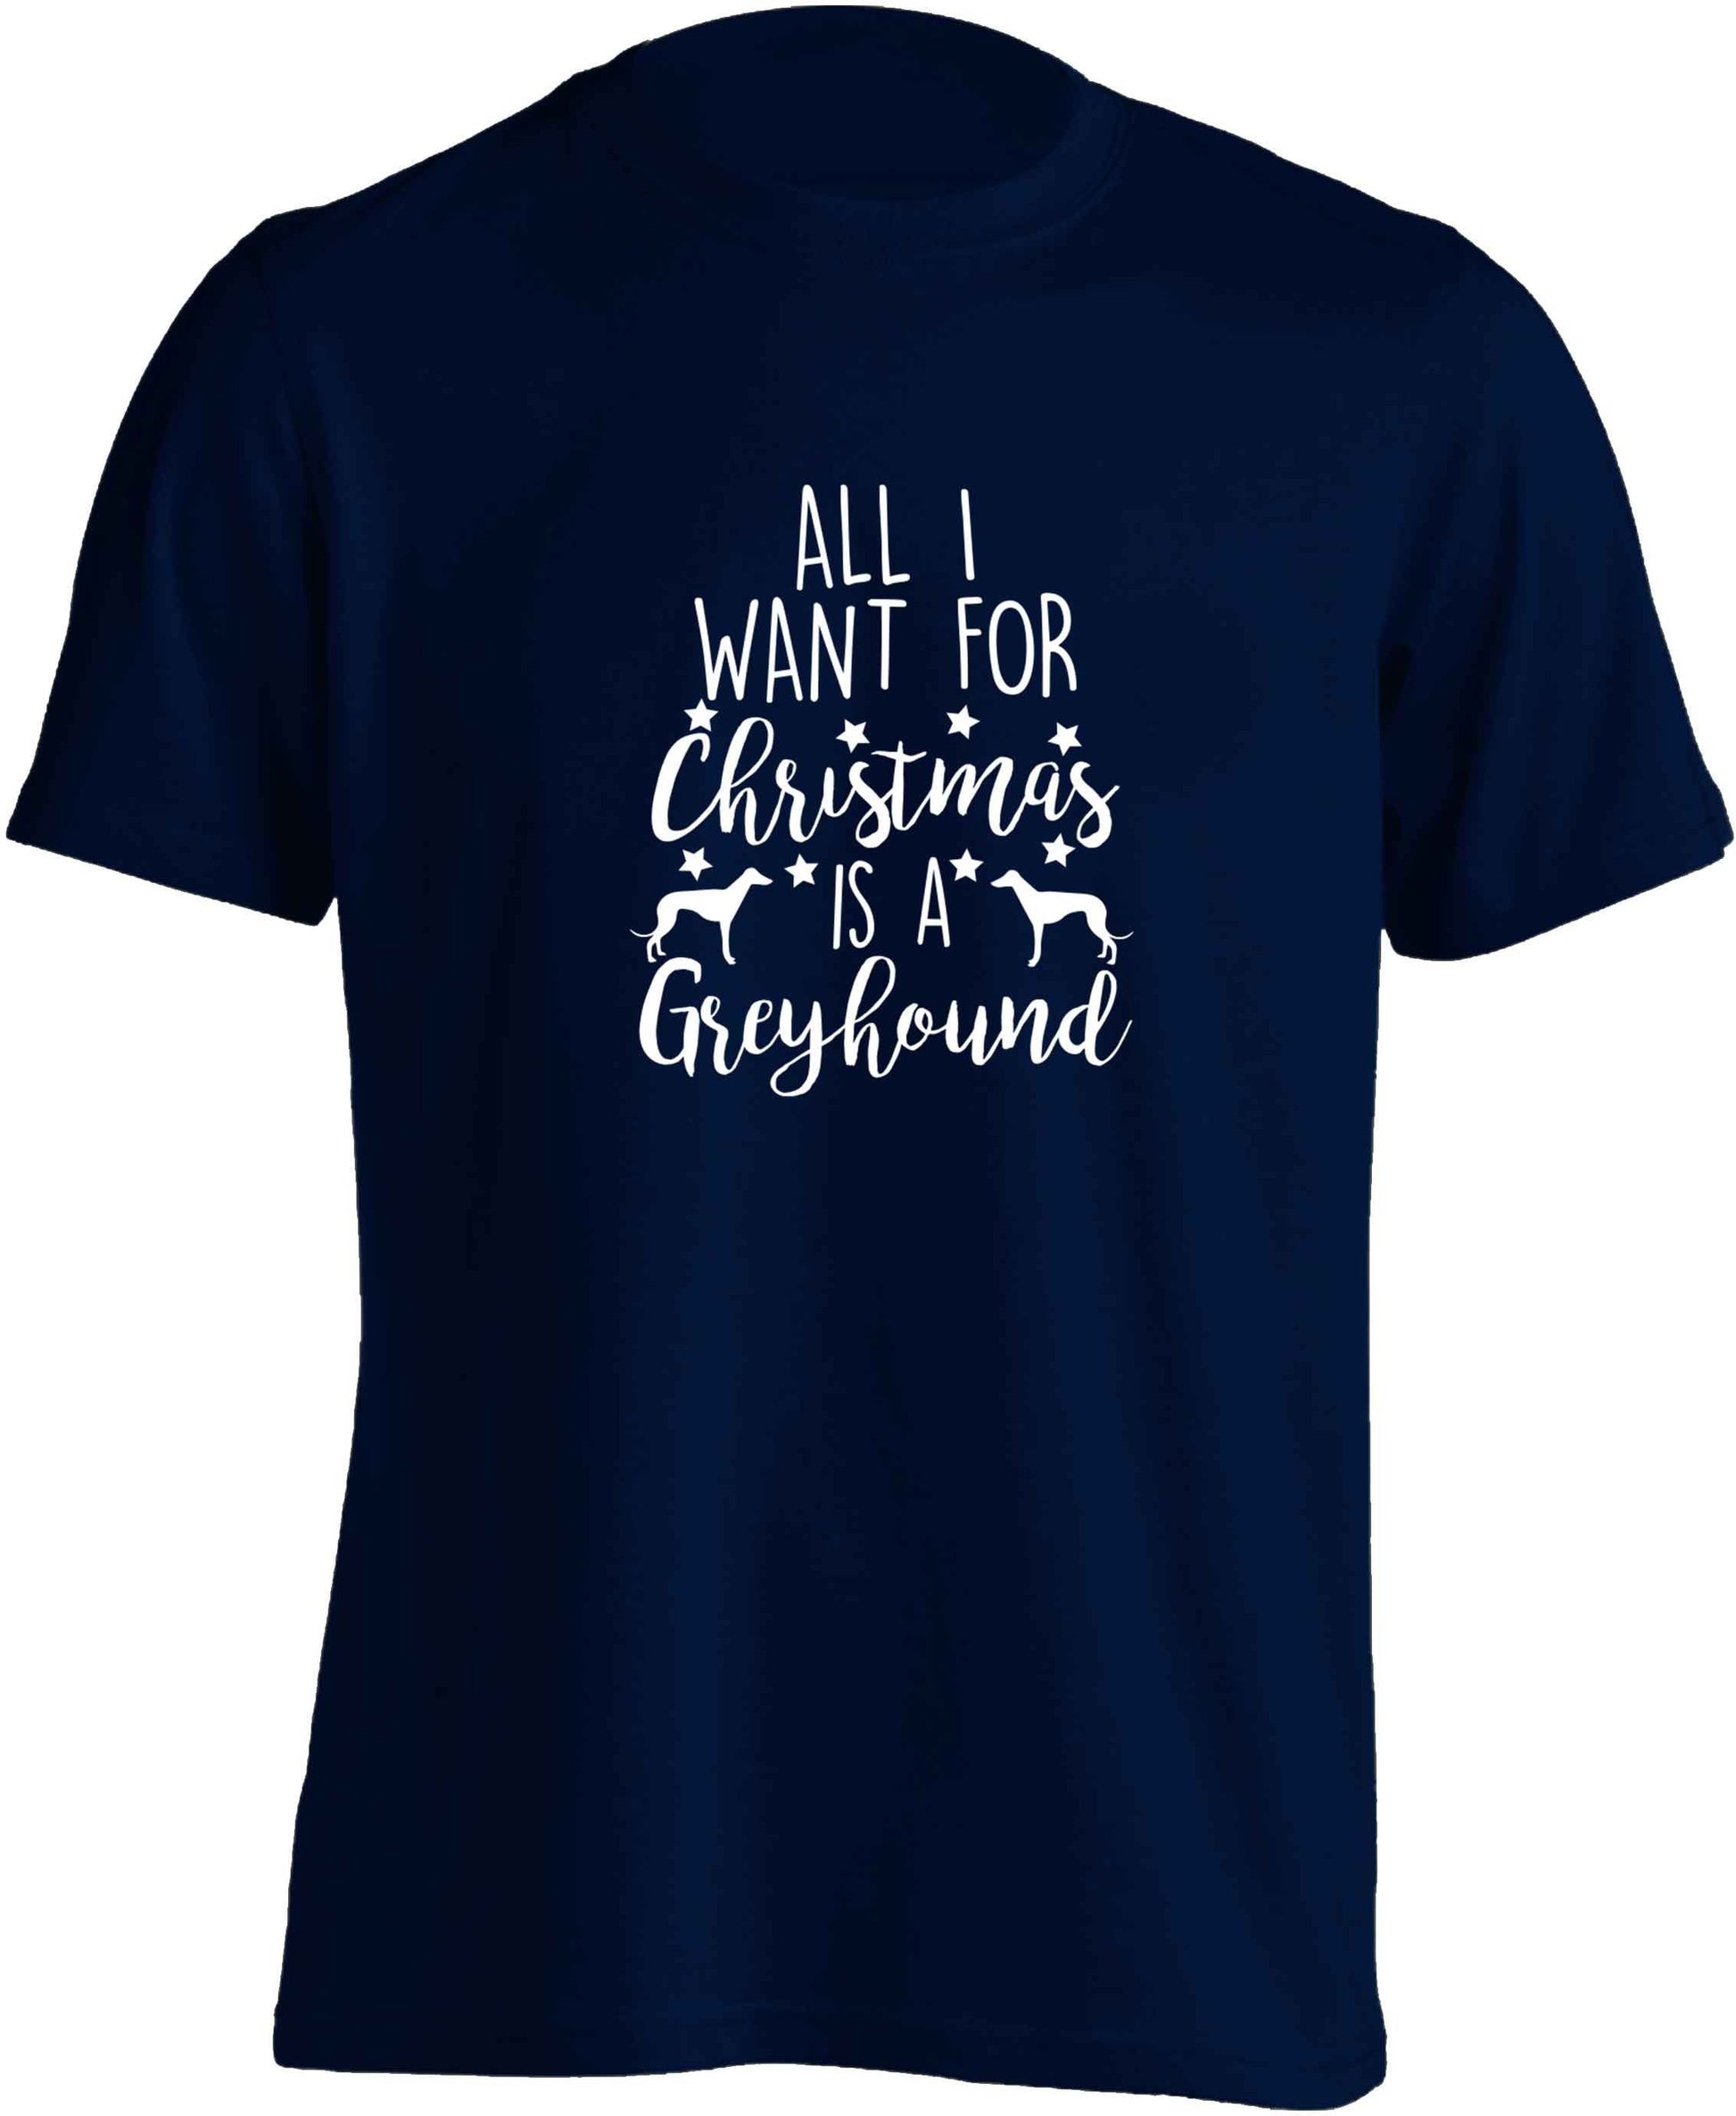 All I want for Christmas is a greyhound adults unisex navy Tshirt 2XL